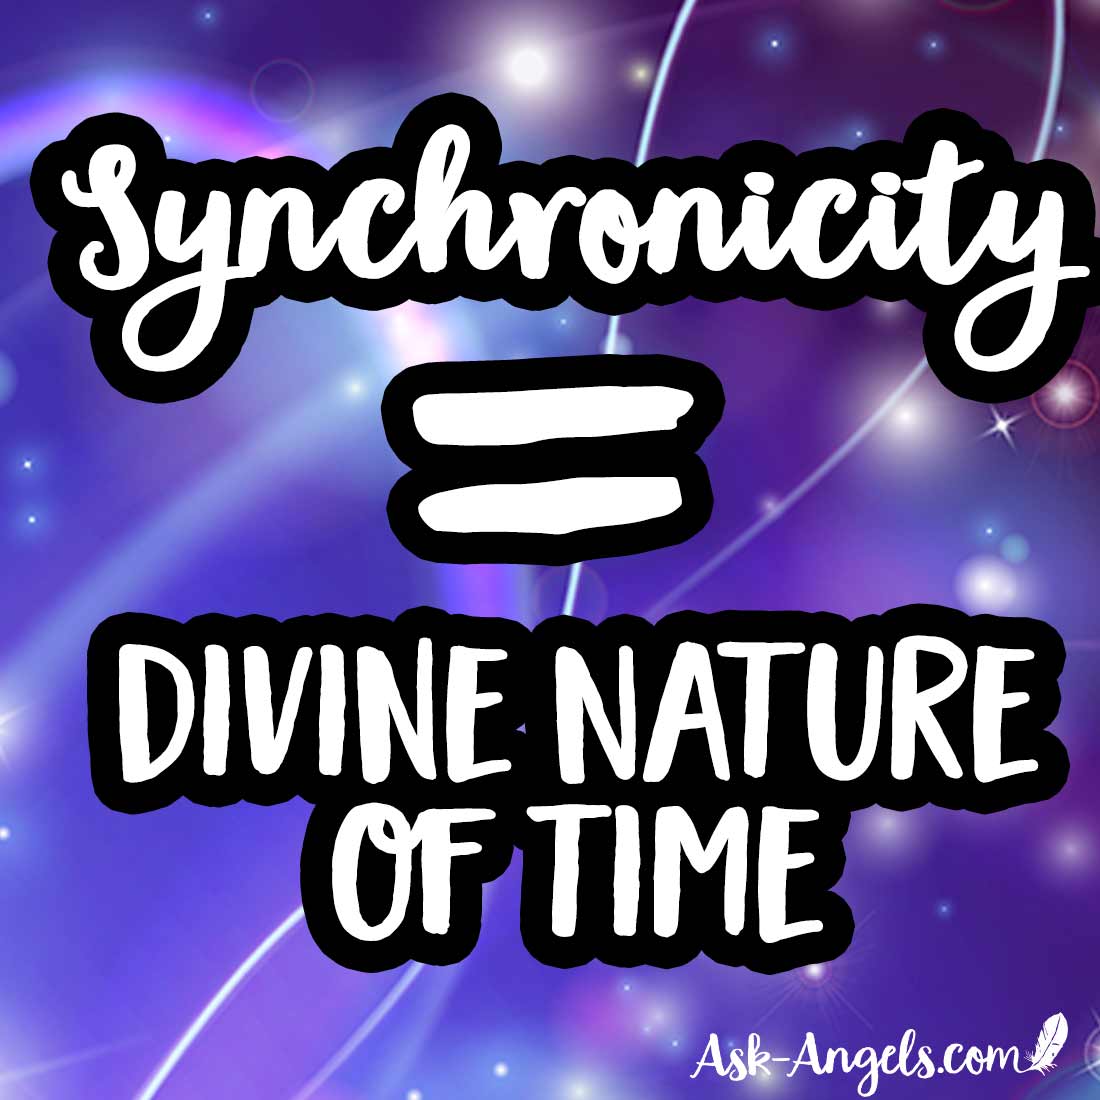 Synchronicity is being in alignment with the Divine Nature of Time